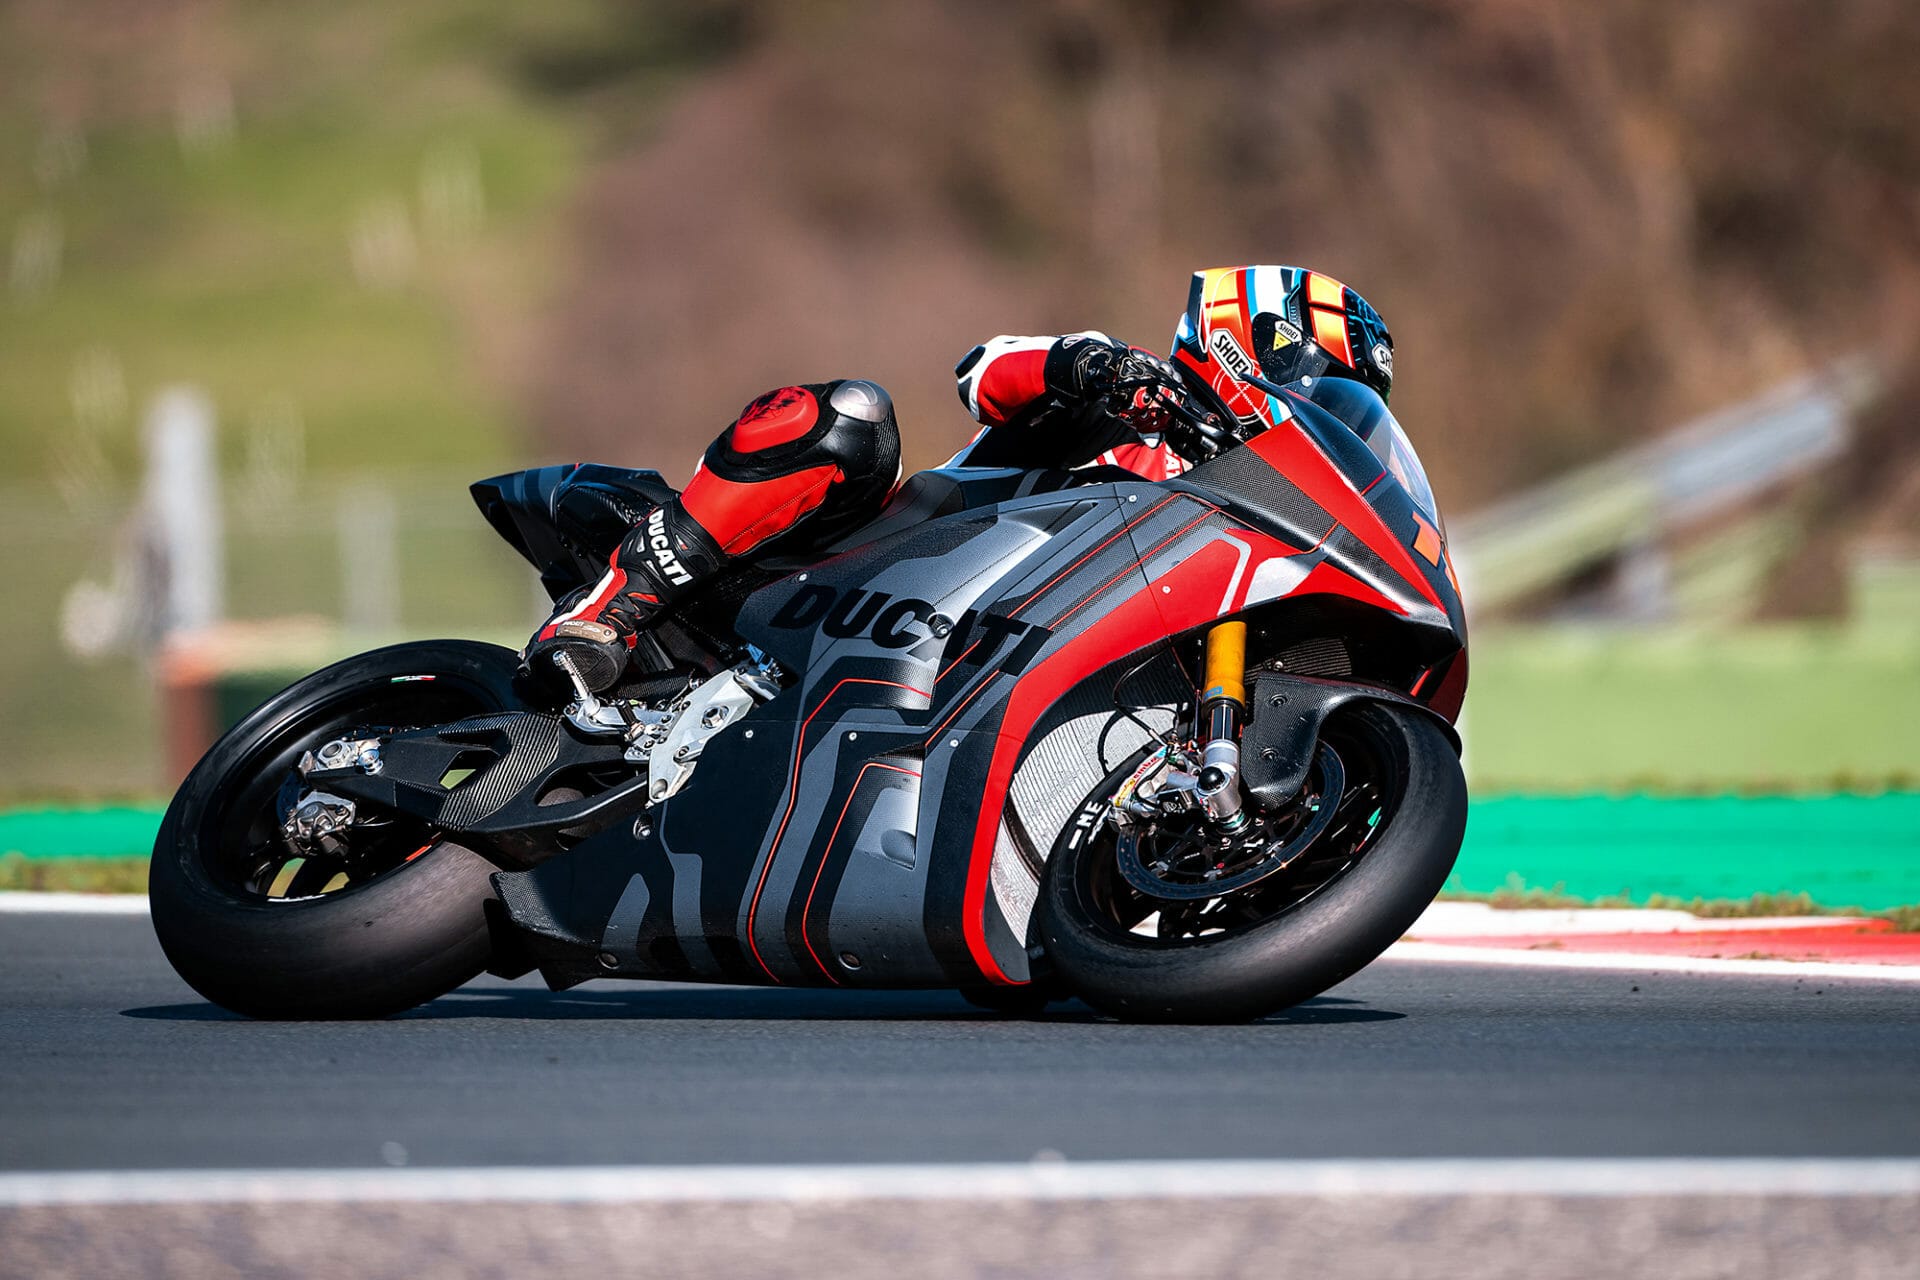 Ducati's V21L unveiled for MotoE - MOTORCYCLES.NEWS